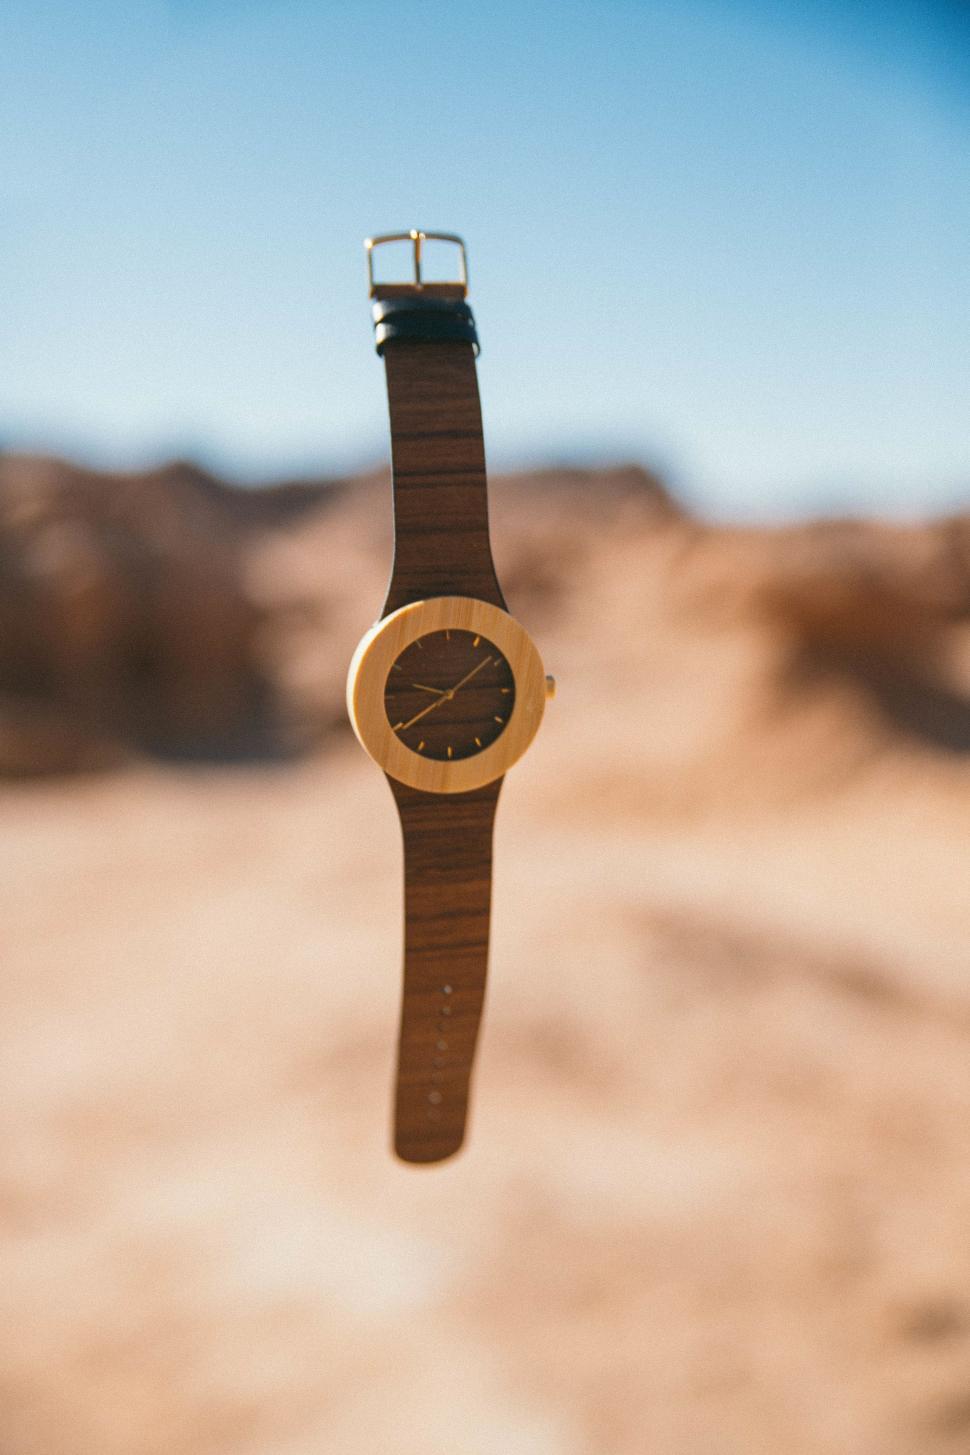 Free Image of Watch Hanging From String in Desert 